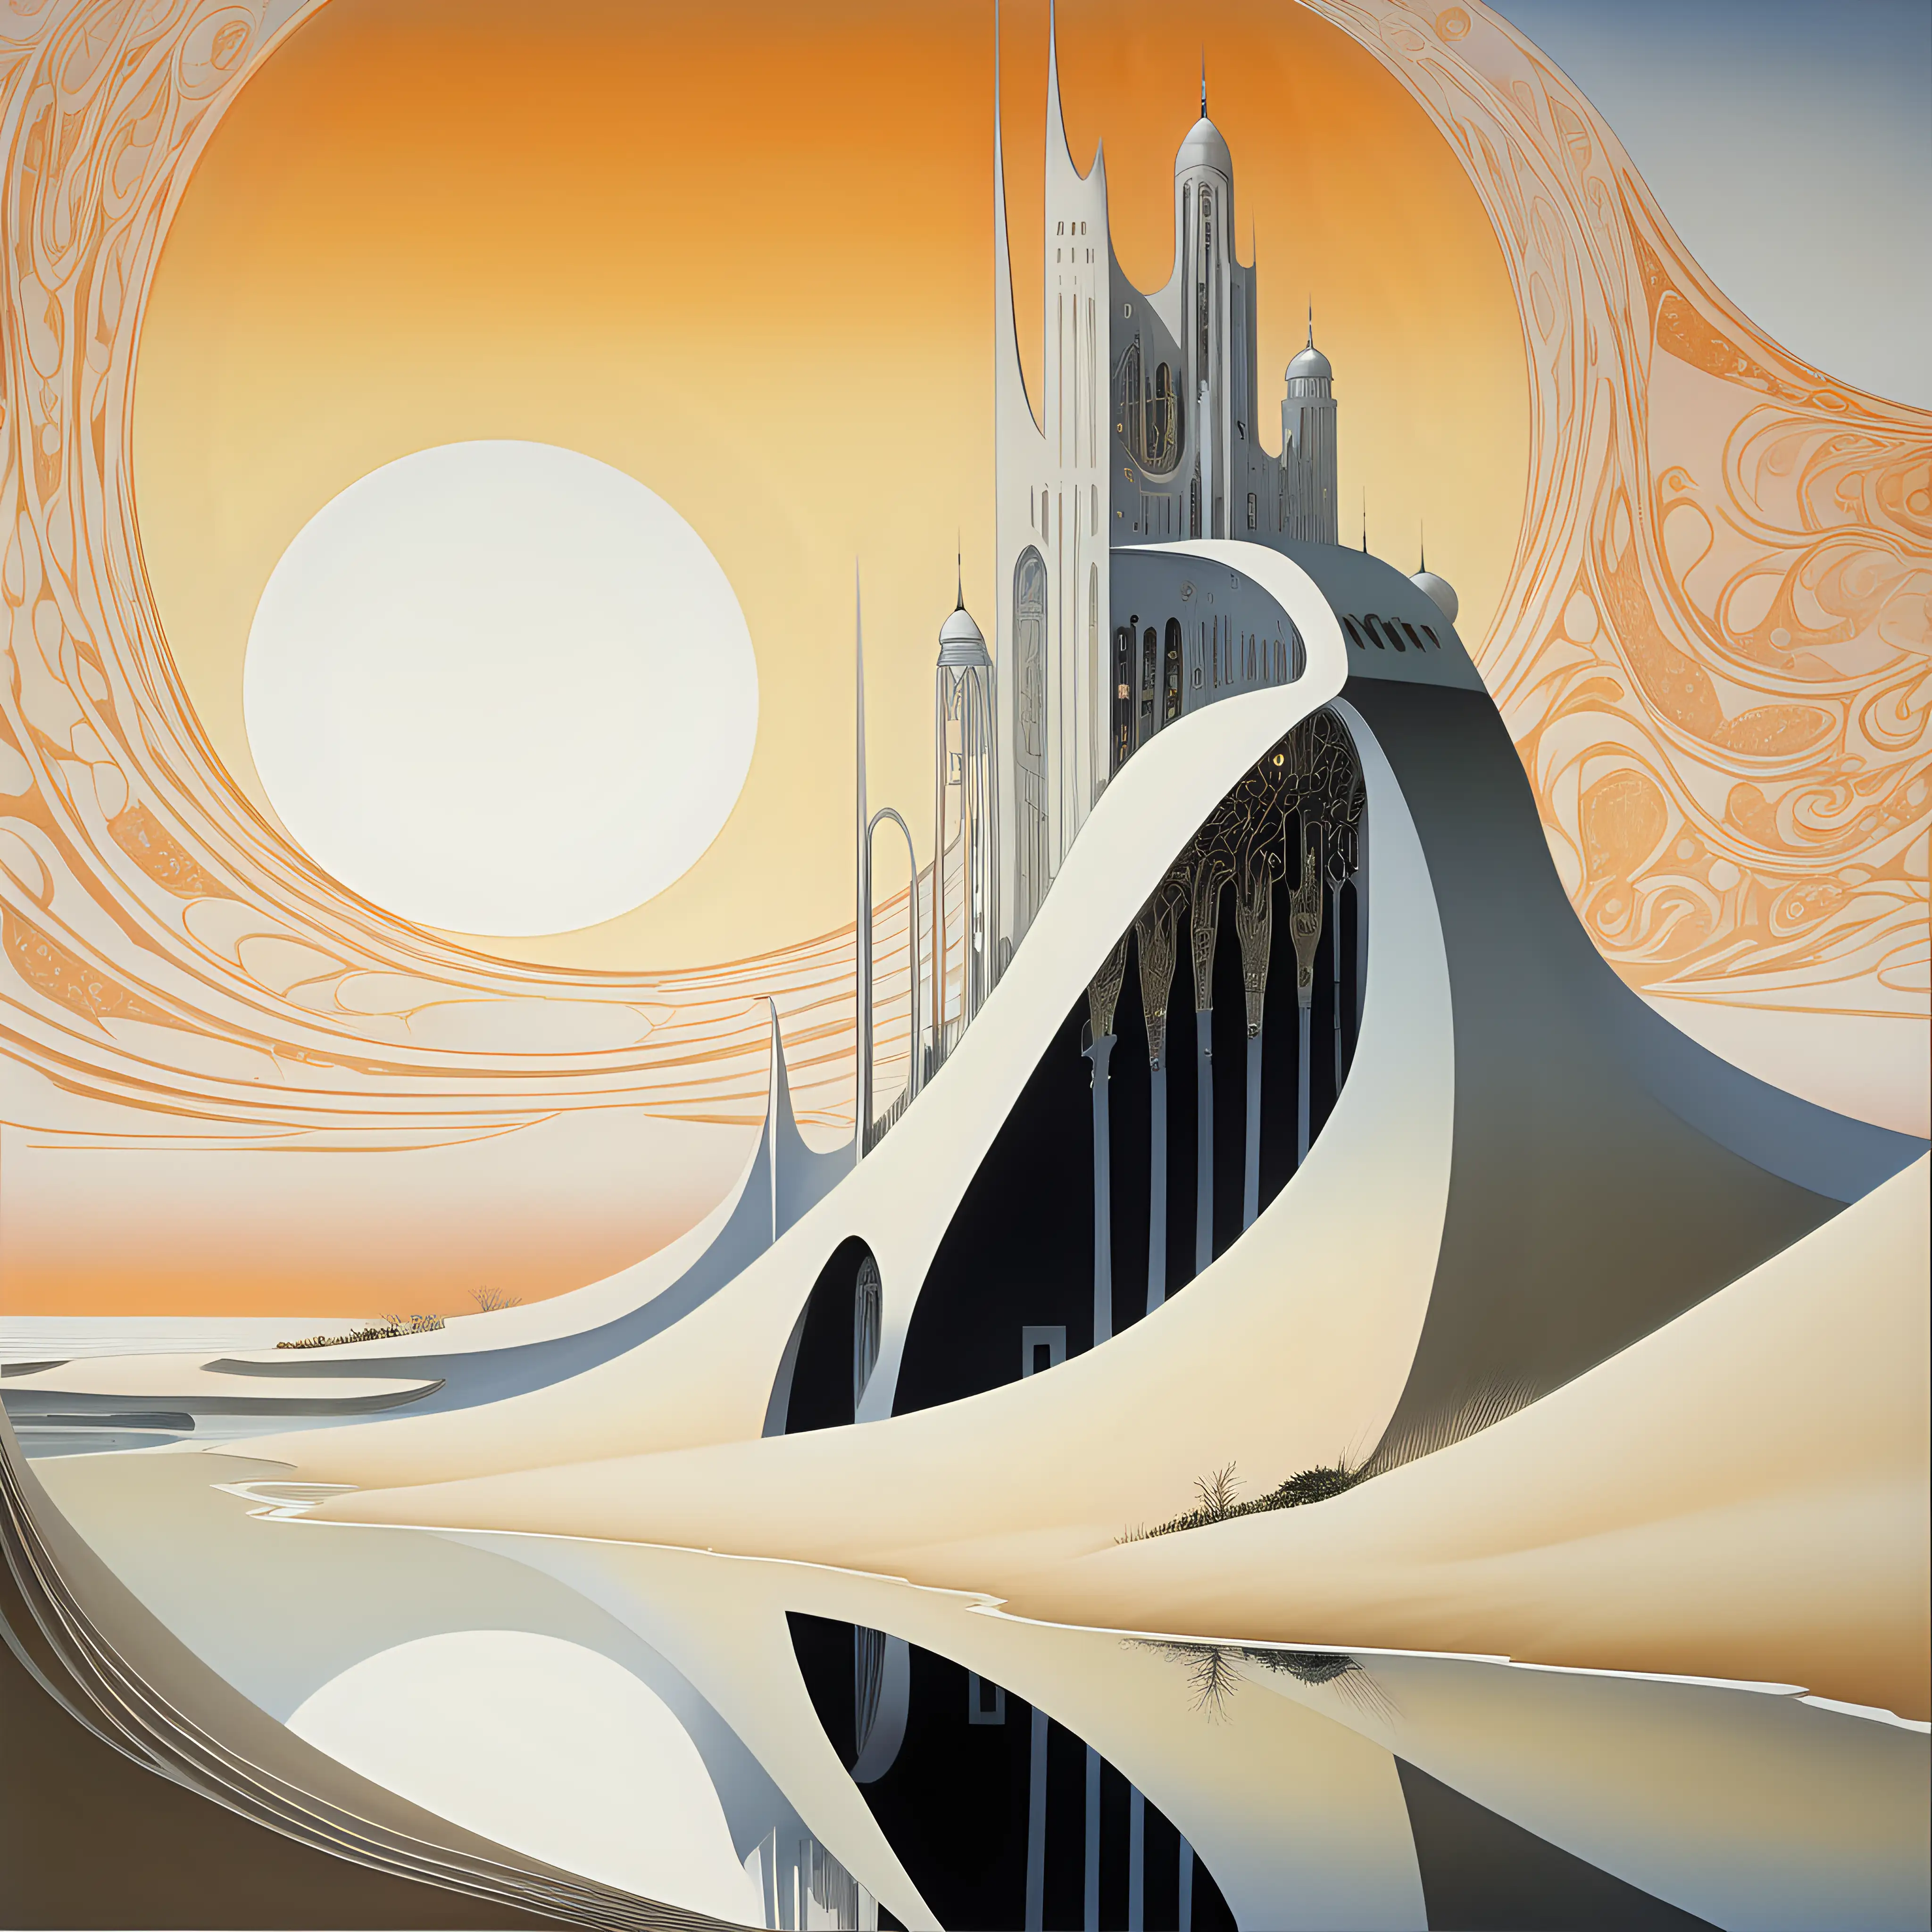 Futuristic Sunrise Over River Dune with Striking Building